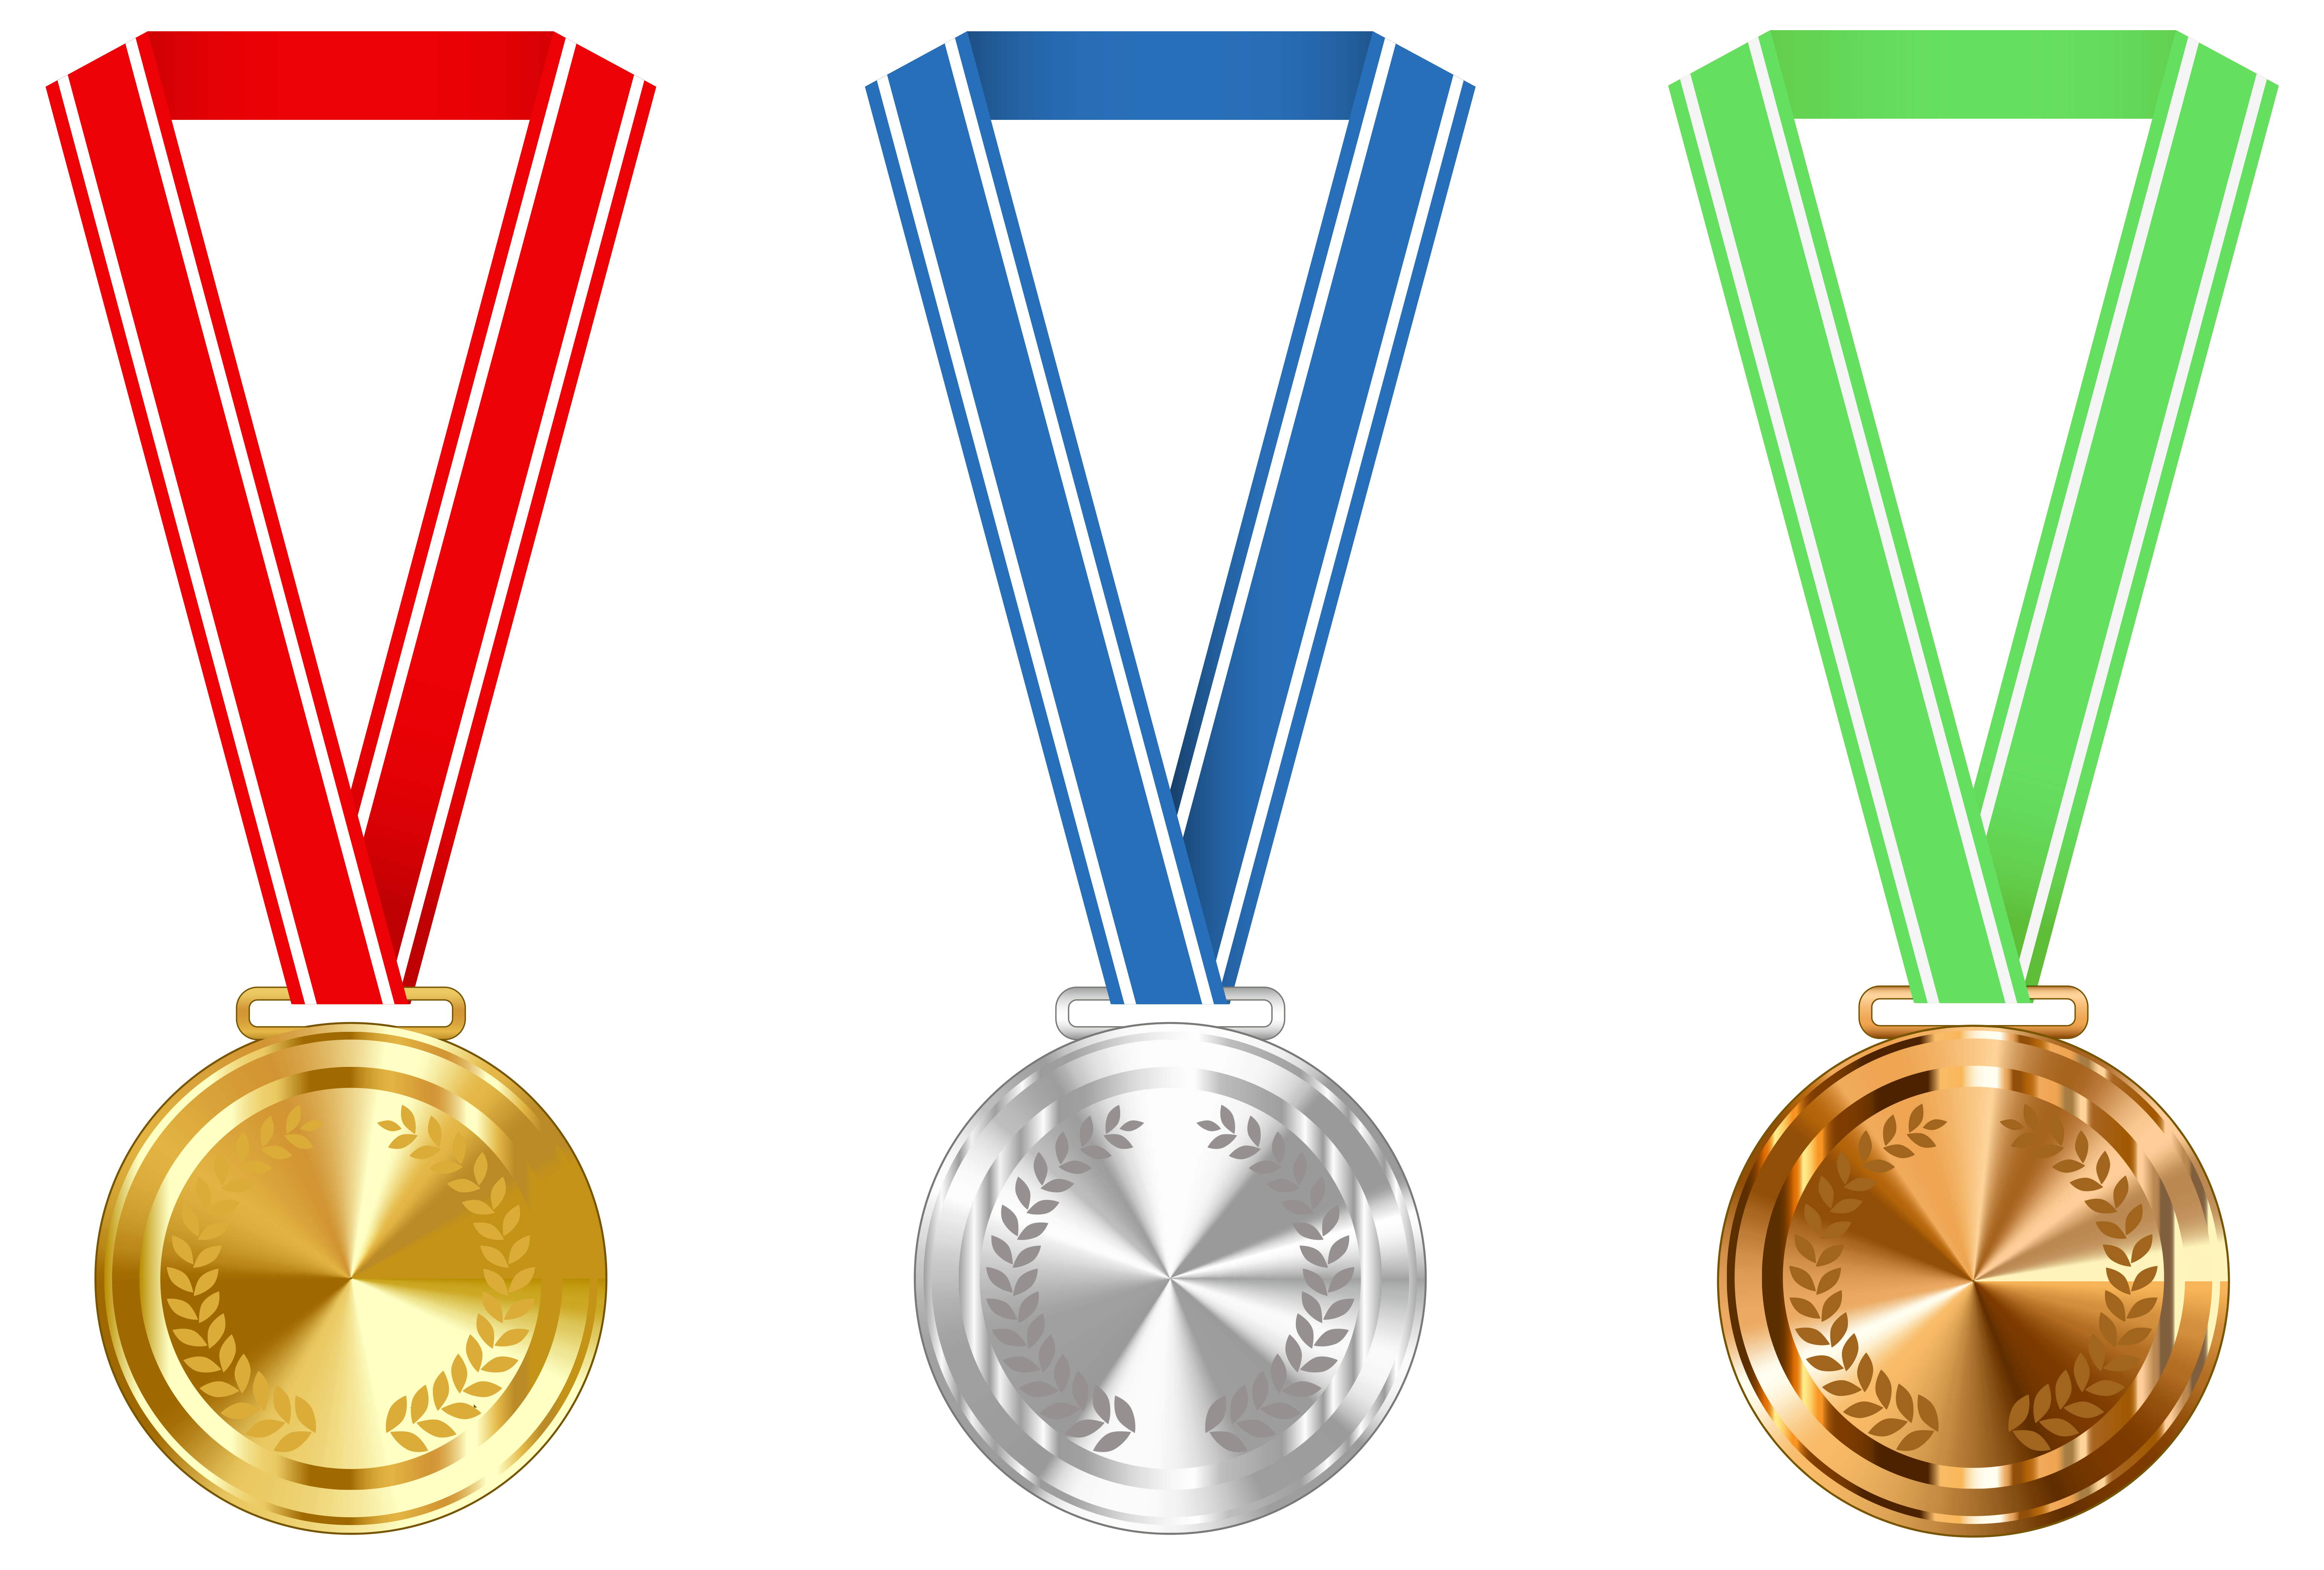 ☼ Swiss Olympique ☼ Resultados ☼  Gold_Silver_and_Bronze_Medals_PNG_Clipart_Image